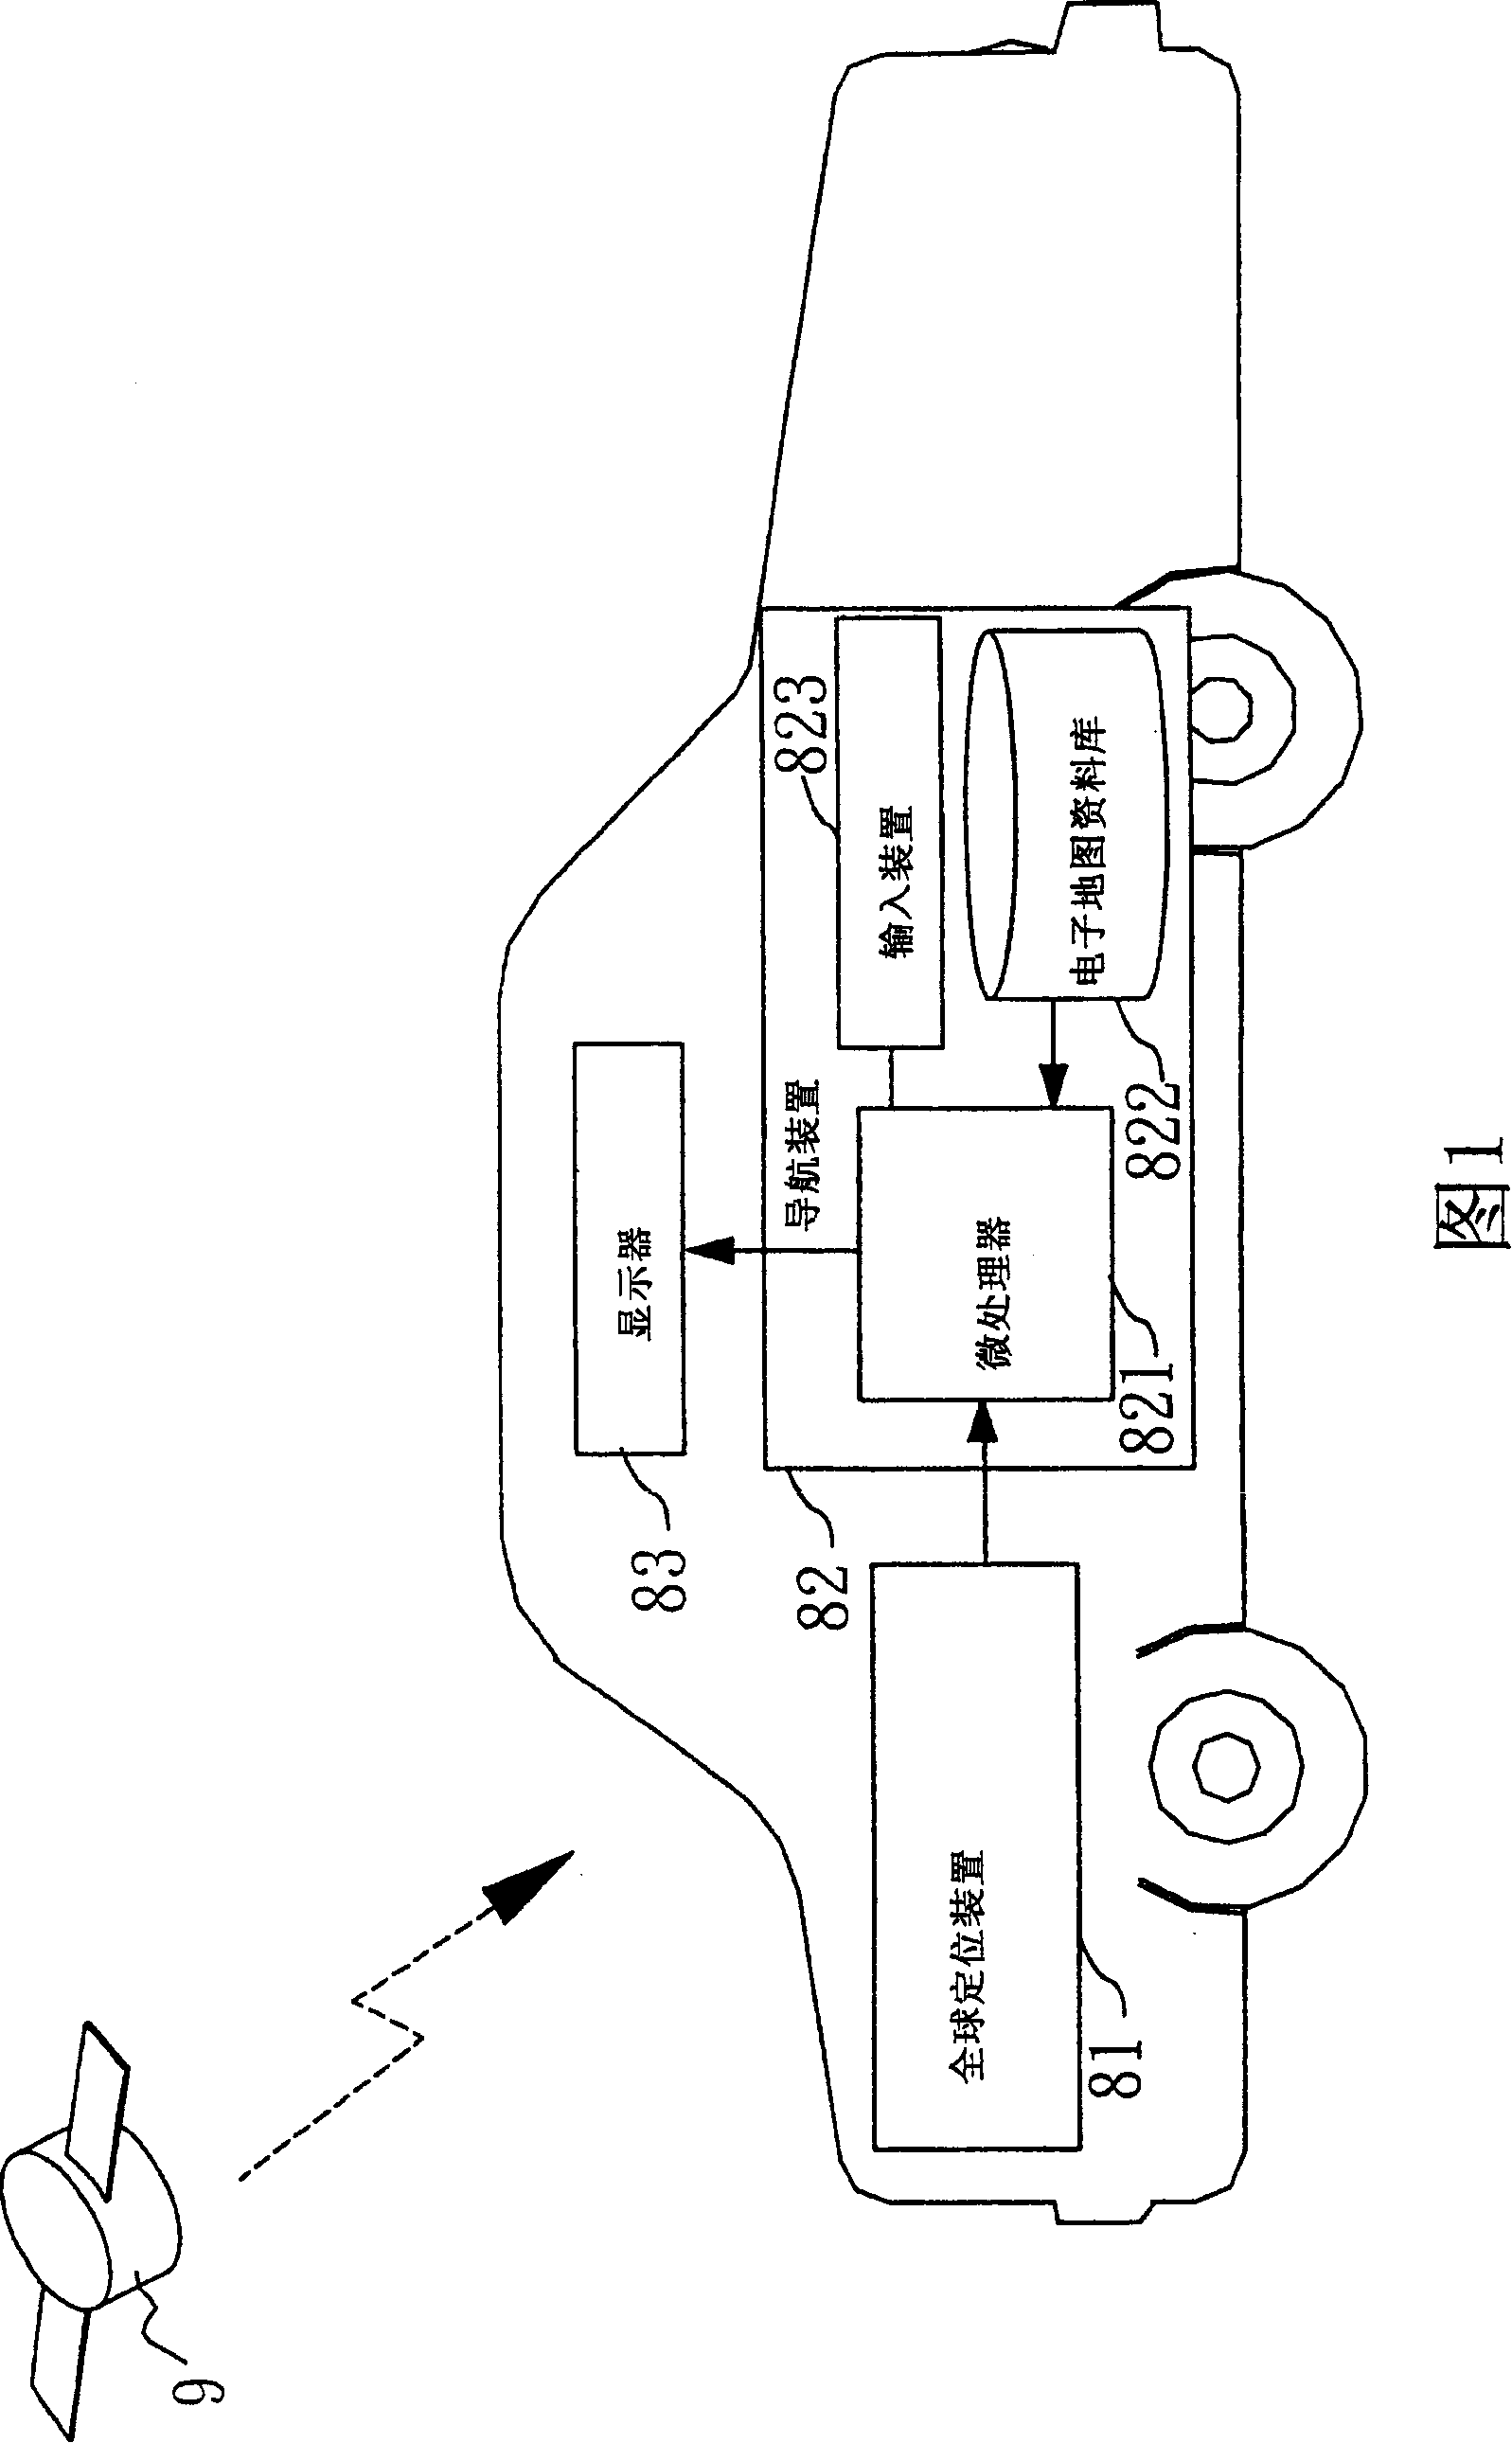 Accurate positioning system and method for vehicle